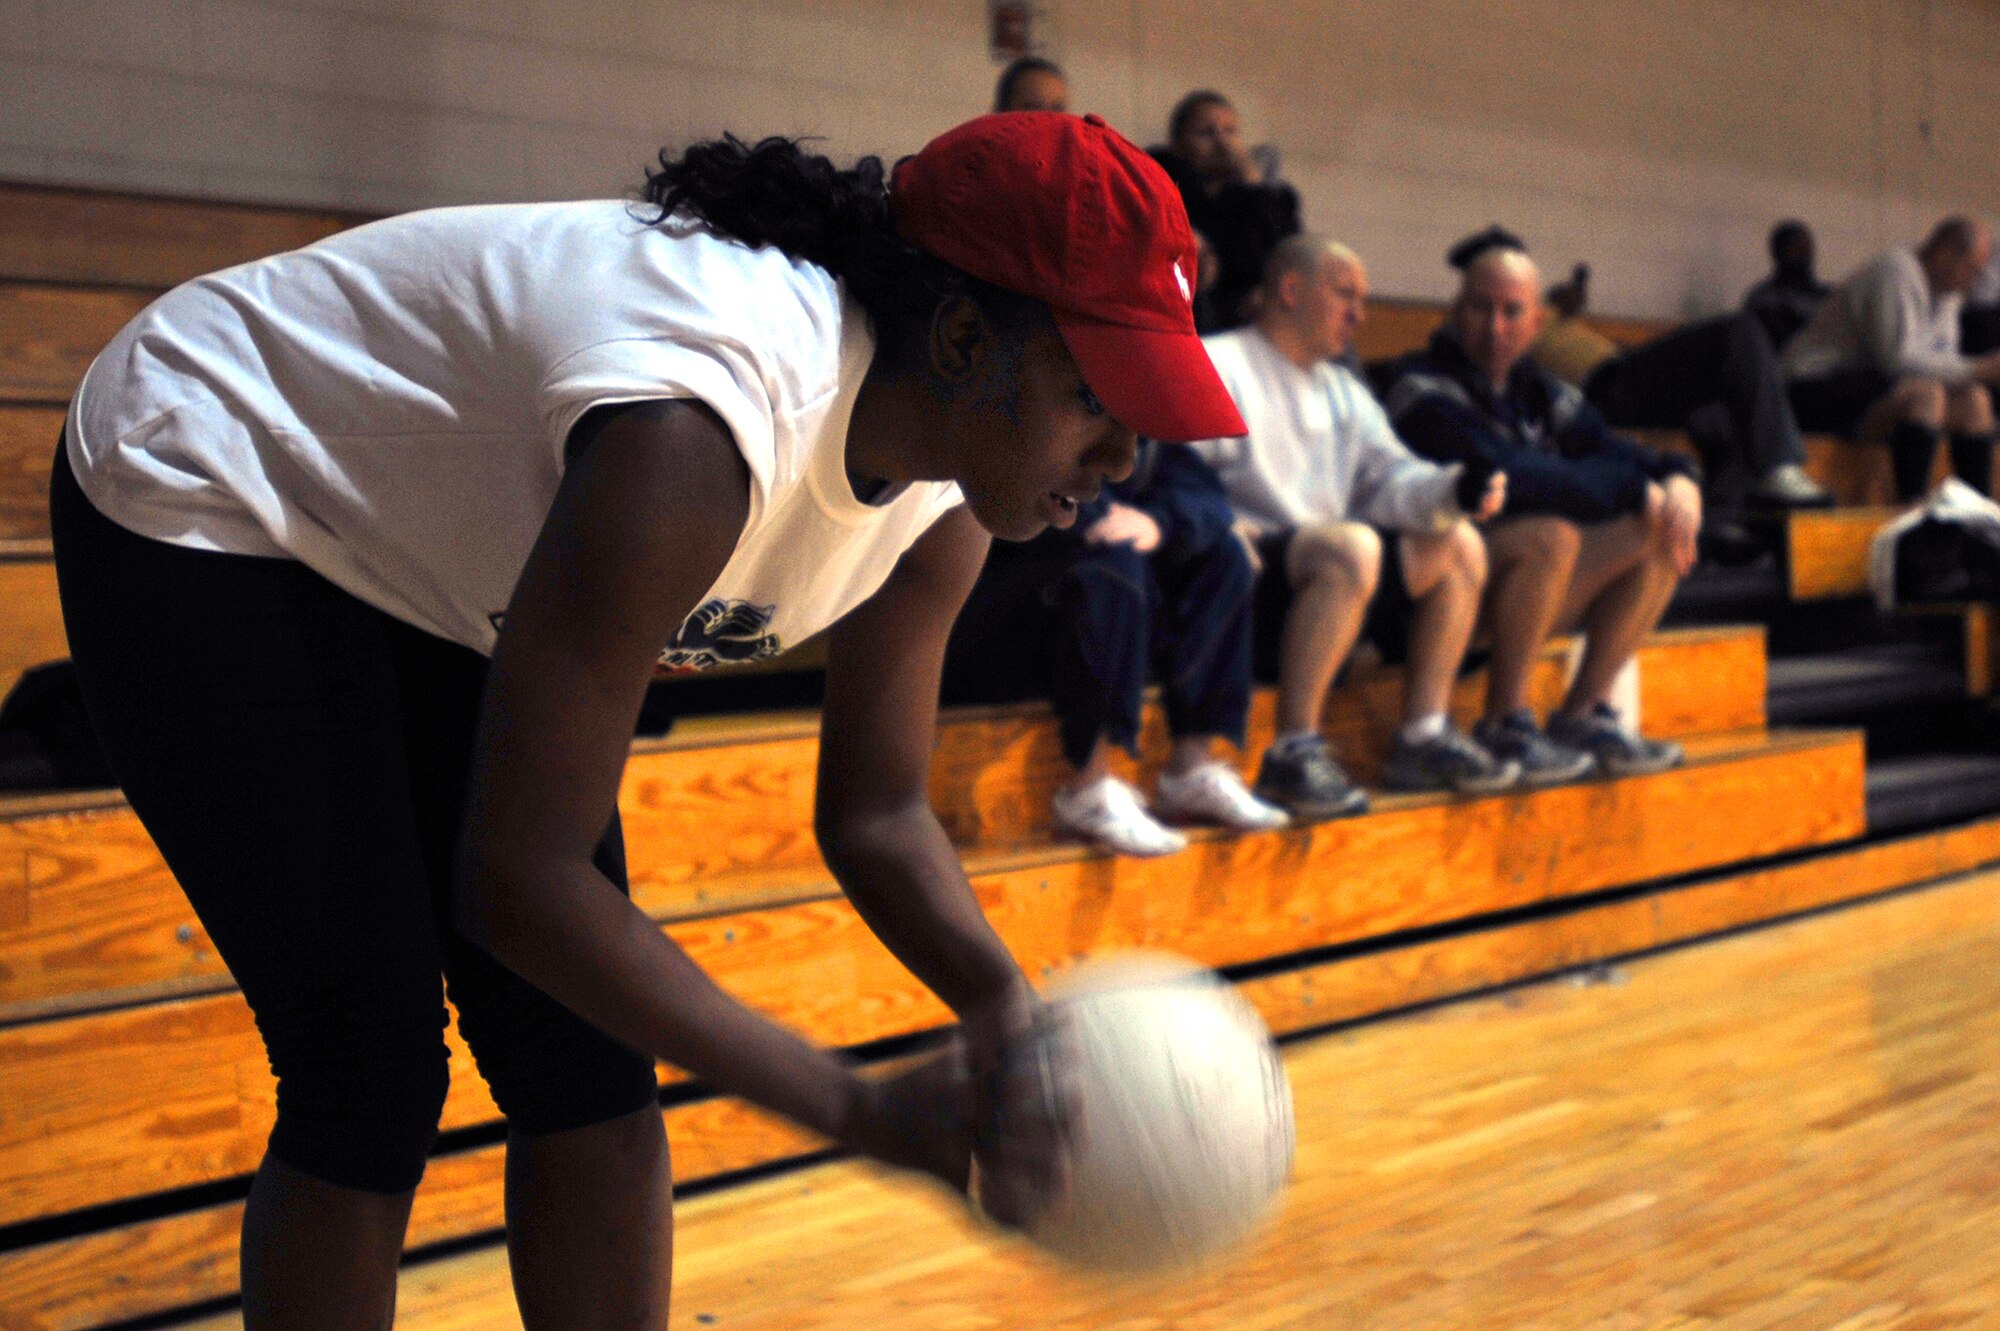 Senior Airman Kristina Overton, 51st Fighter Wing public affairs specialist and Osan Junior Enlisted Council president, prepares to serve in the Battle of the Tiers volleyball tournament at the Osan Fitness Center on Osan Air Base, Republic of Korea, March 29, 2013. This was the first time the teams from organizations across the base participated in the single-elimination tournament. (U.S. Air Force photo/Senior Airman Alexis Siekert)